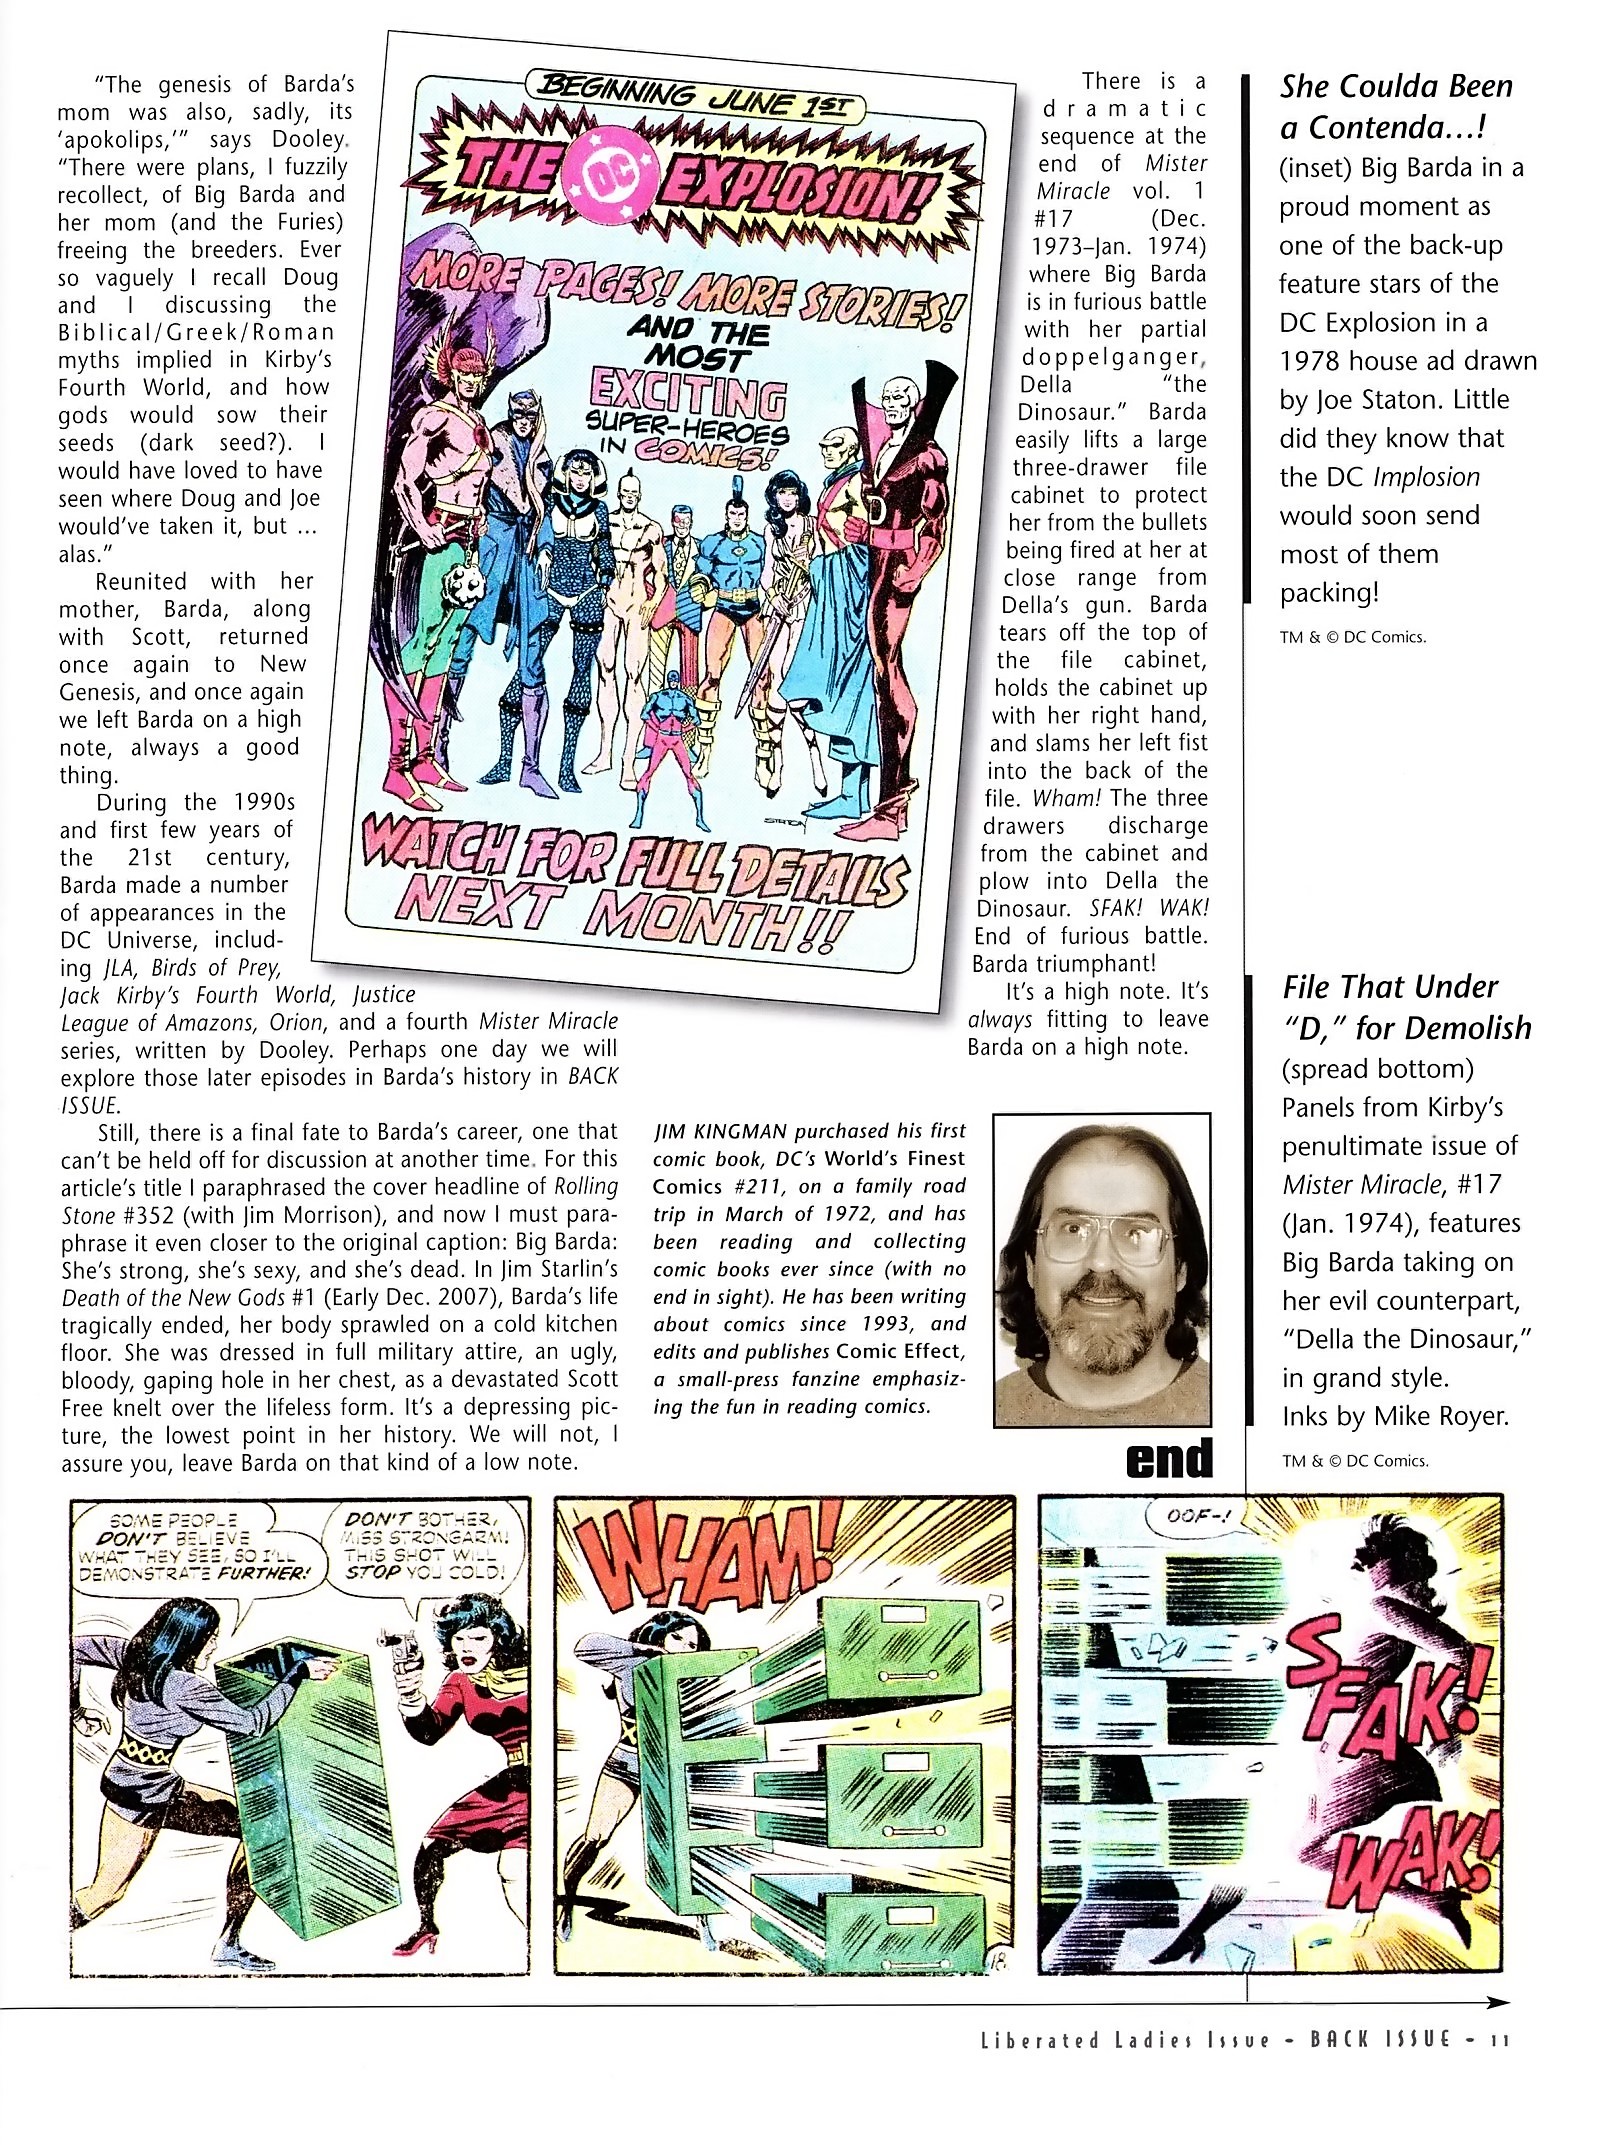 Read online Back Issue comic -  Issue #54 - 11